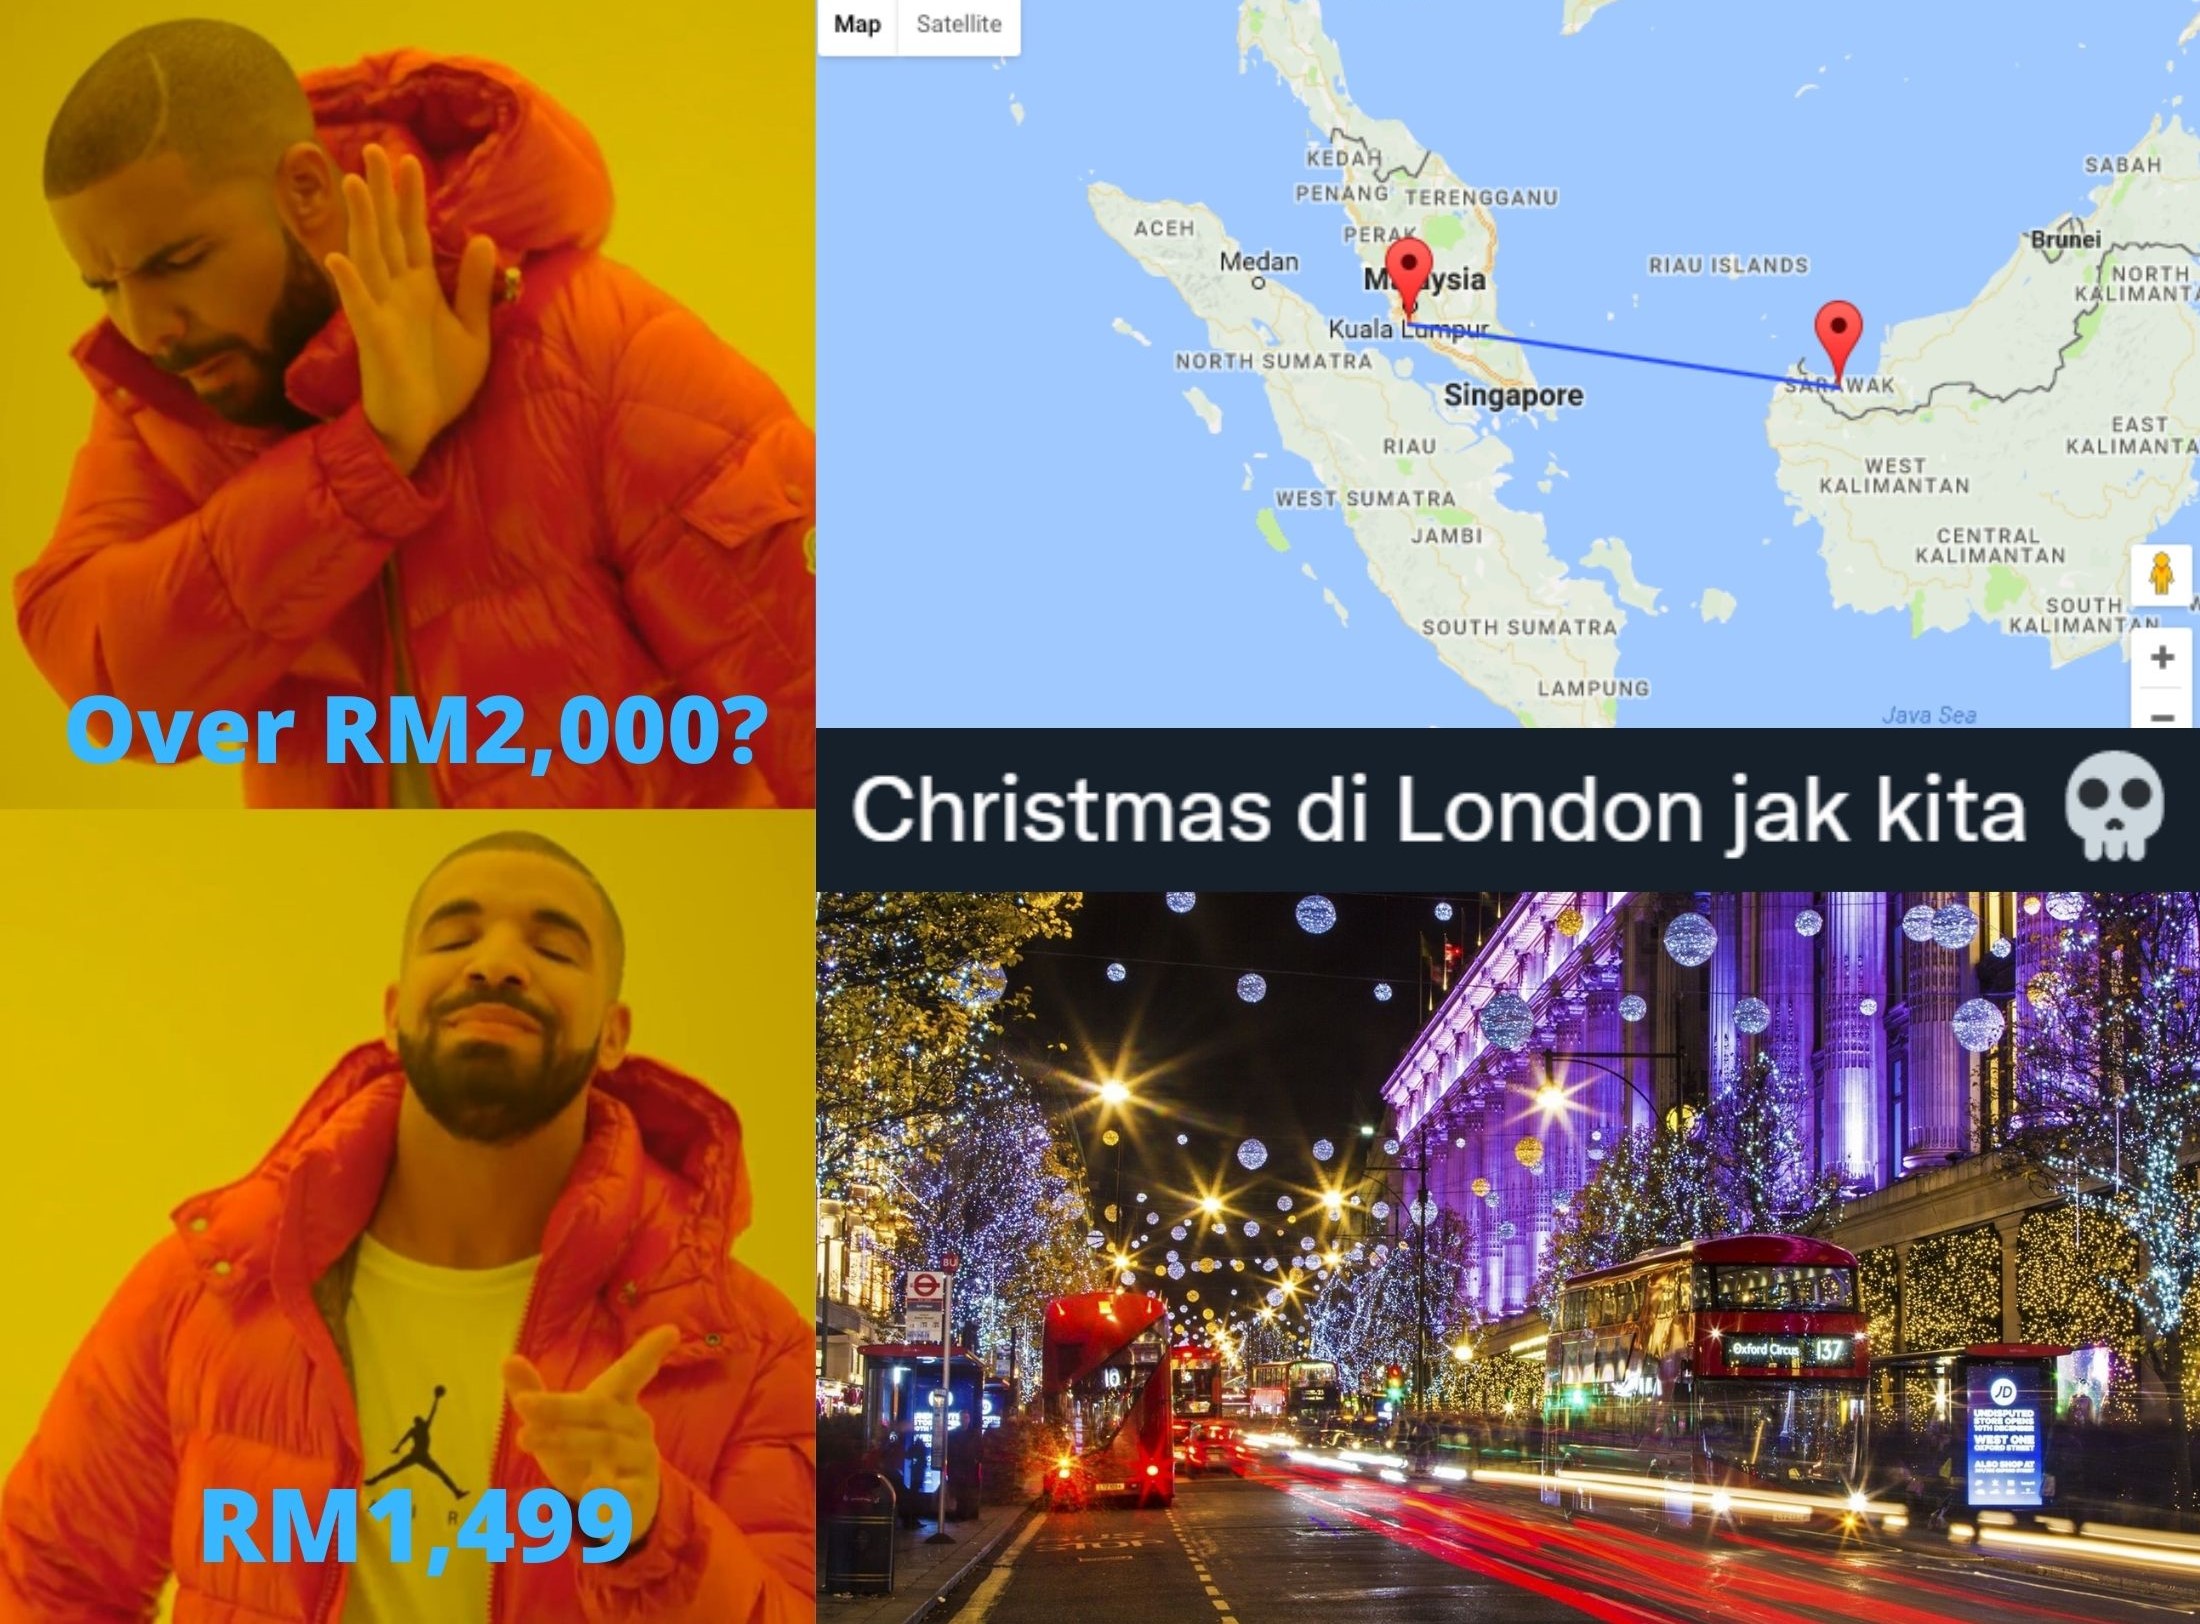 “Might as well spend Christmas In London” as ticket prices cost between RM261 to over RM2,000 just to travel to Sarawak. 